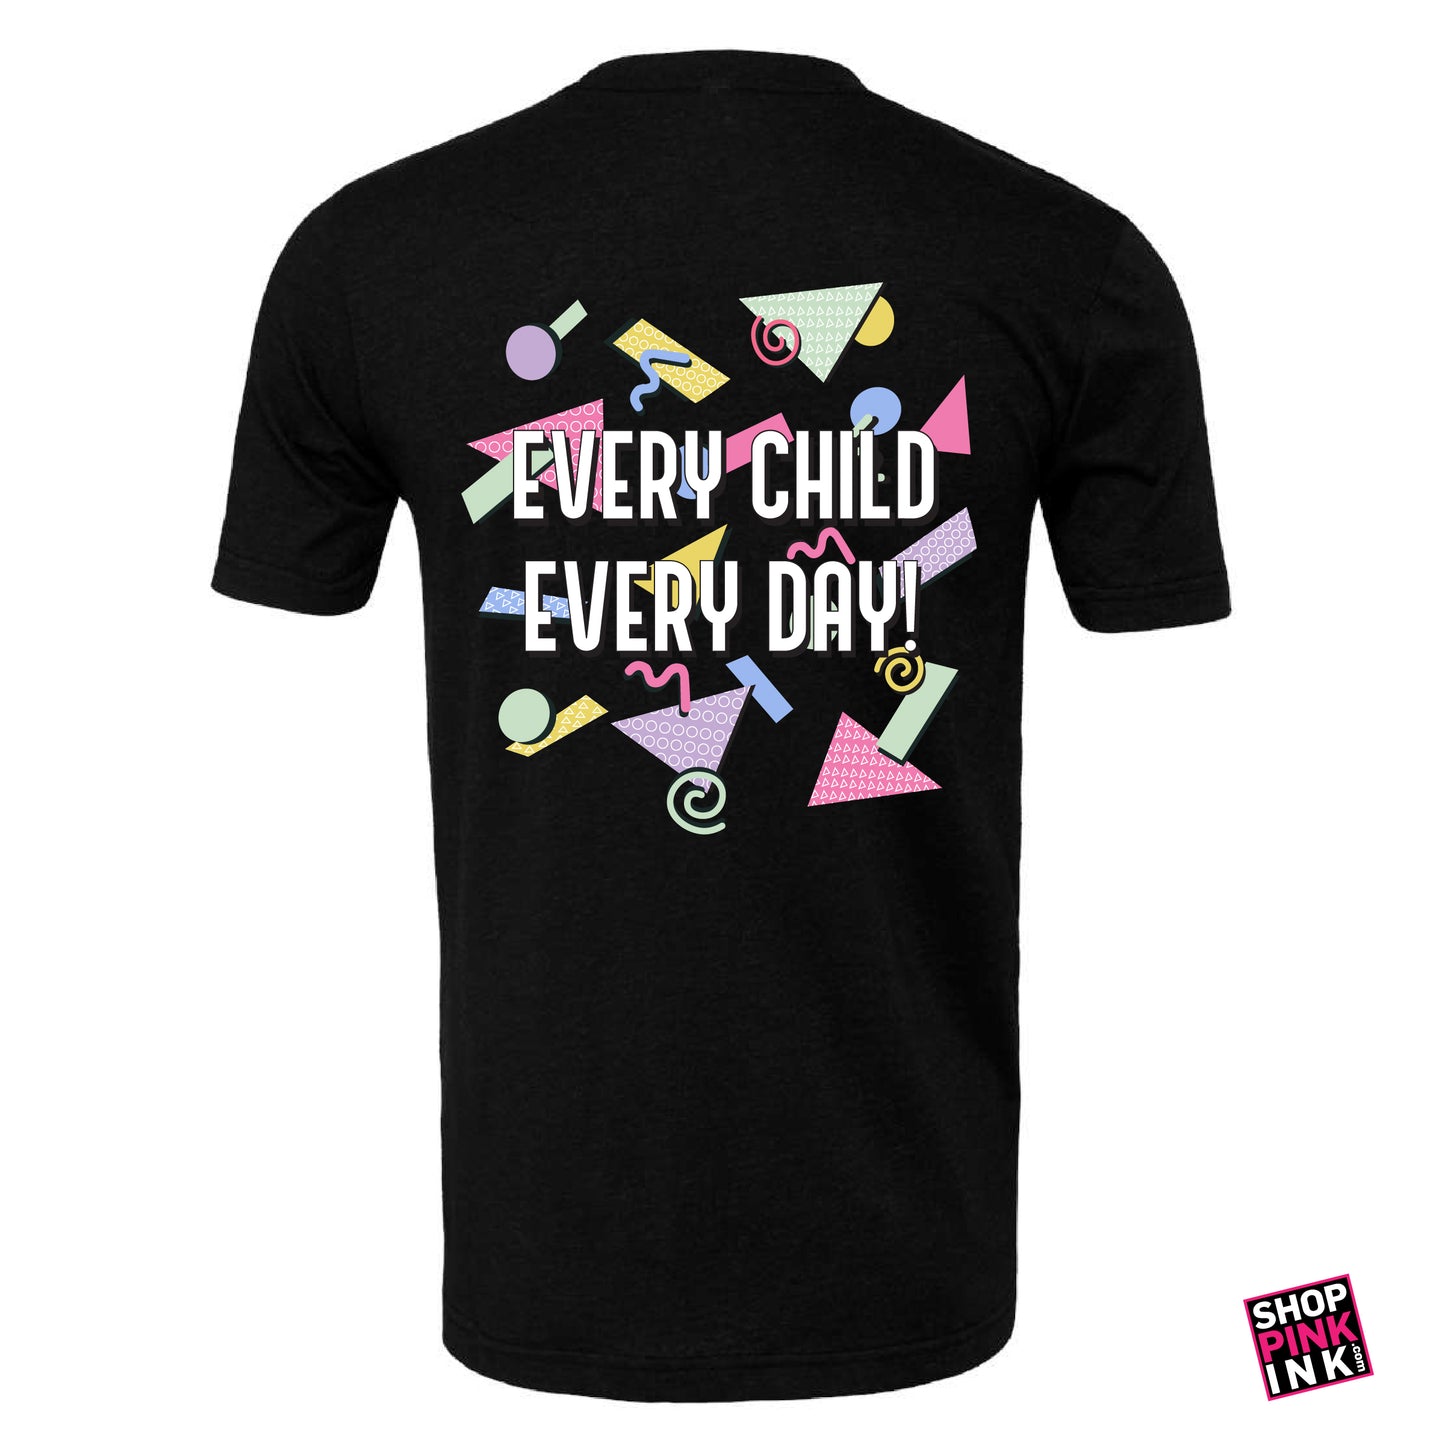 Gandy Elementary - Every Child Every Day - 22454